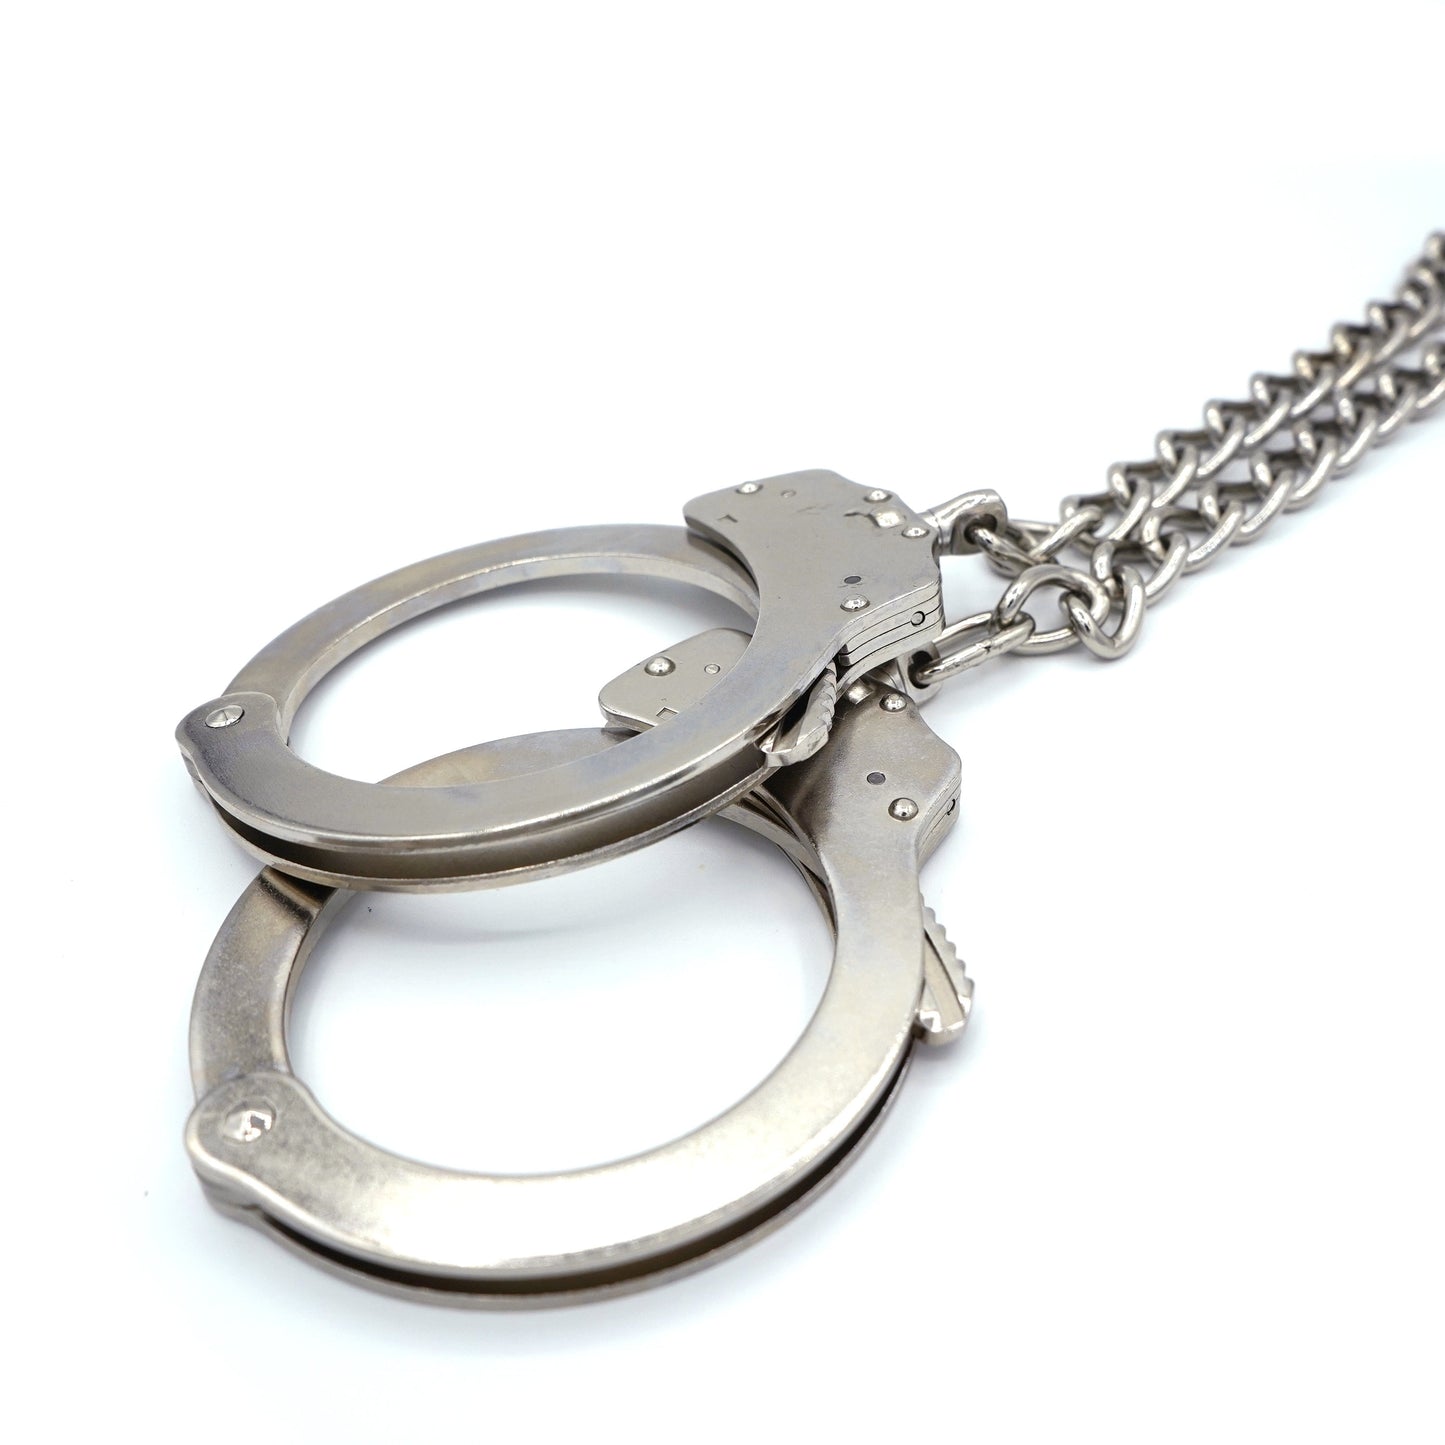 Police Steel Ankle Cuffs with Chain